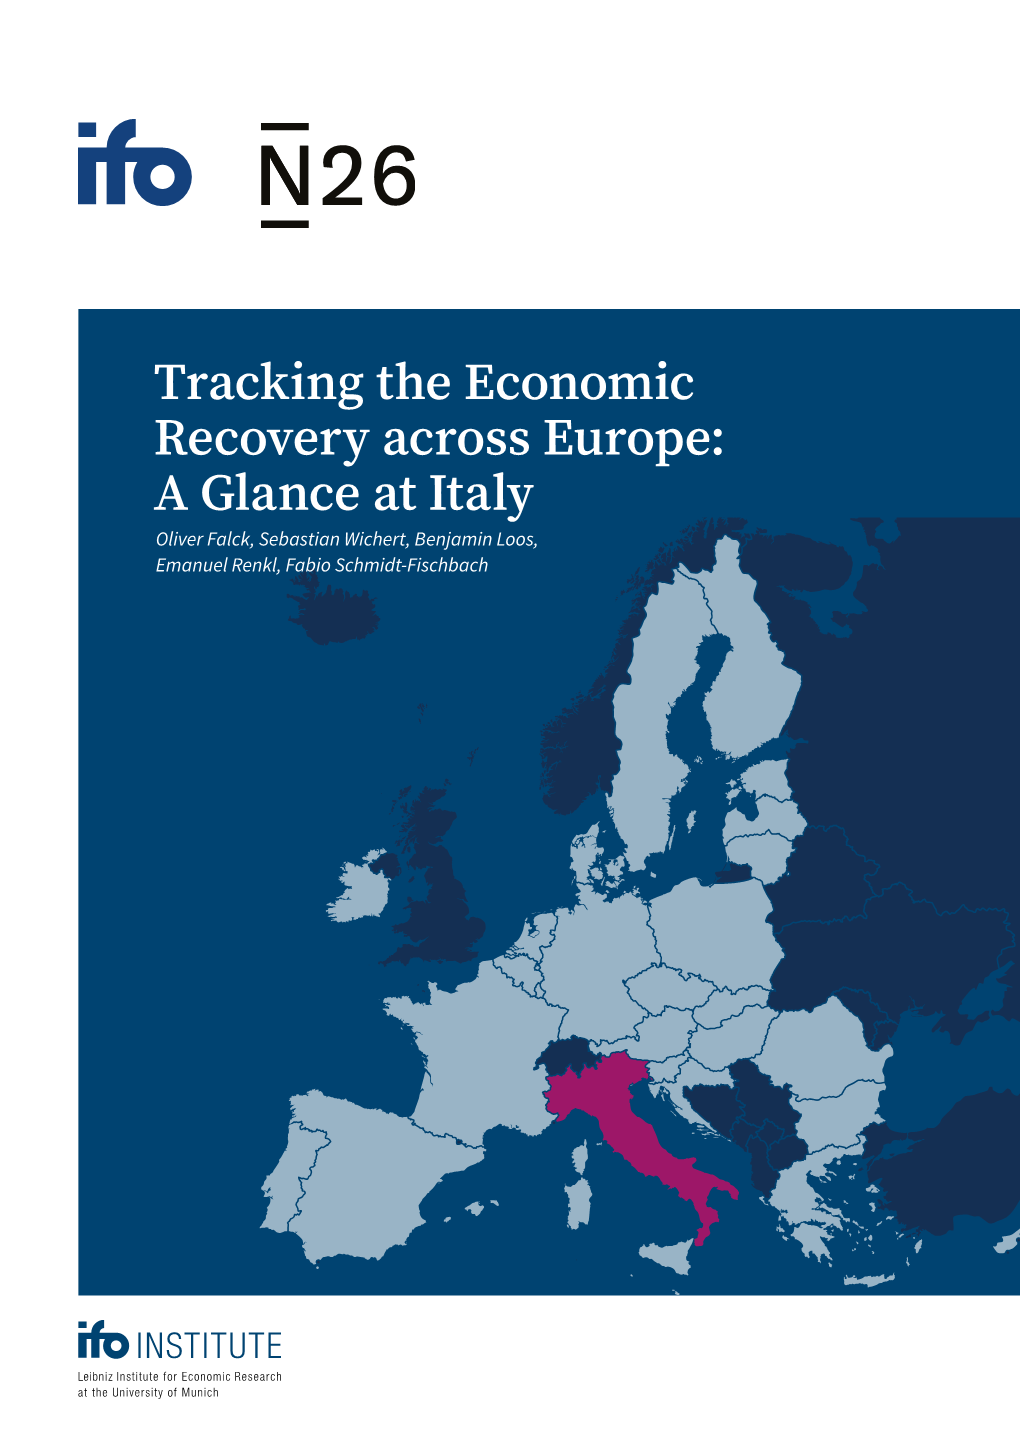 Tracking the Recovery of Private Consumption: a Glance at Italy 1 Introduction